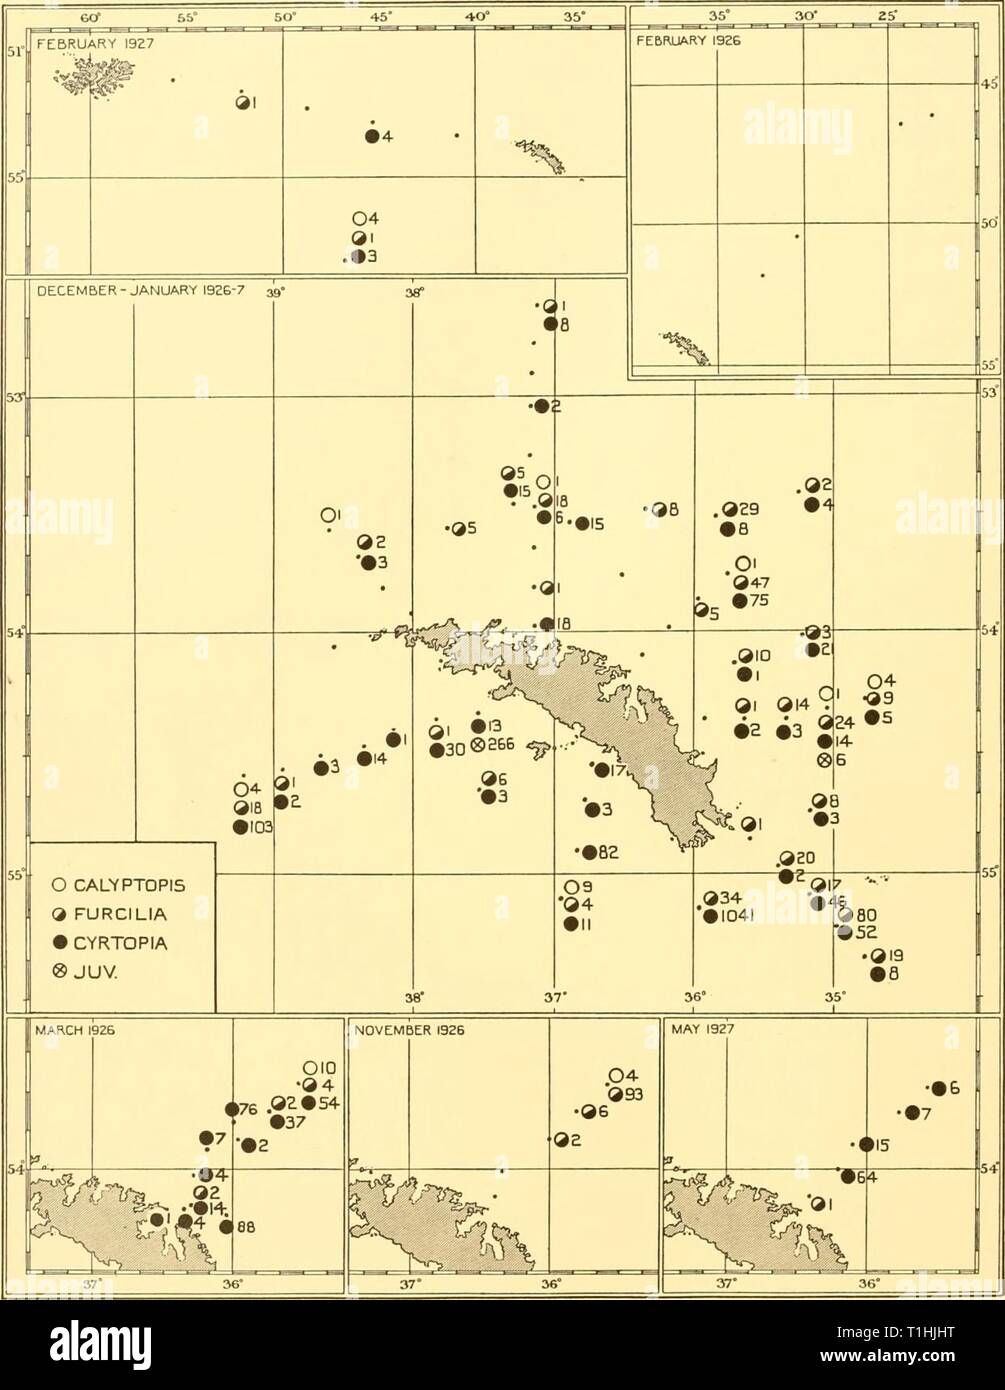 Discovery reports (1935-1936) Discovery reports  discoveryreports11inst Year: 1935-1936  2o6 DISCOVERY REPORTS    Fig. 91. Charts showing the distribution of Euphausia frigida larvae taken in N 70 V nets in the 1926-7 surveys. For hydrological and phytoplankton conditions see Figs. 2, 6, 7, 8, 38, 39 and 41. Stock Photo